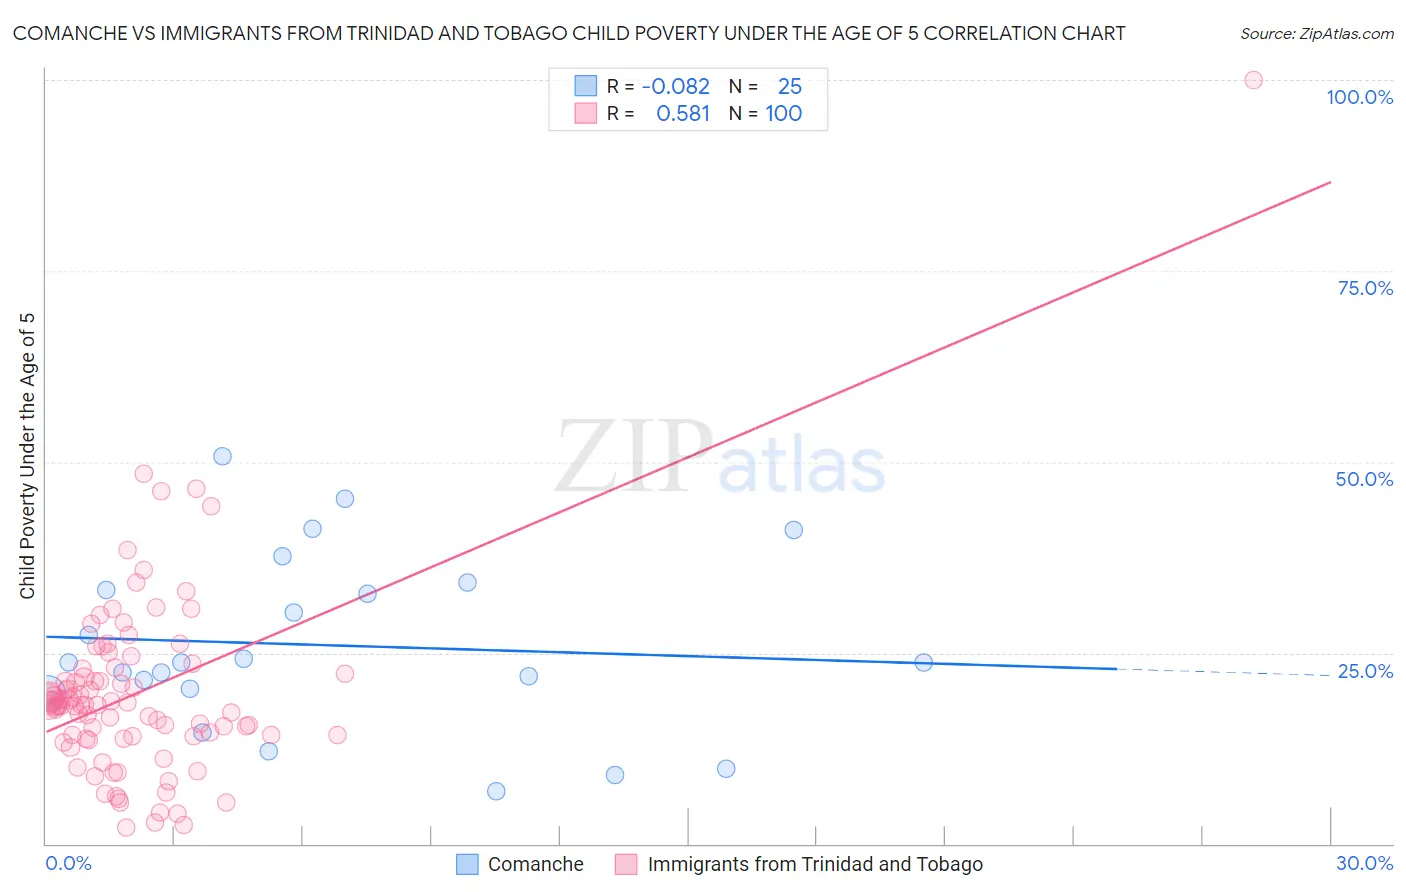 Comanche vs Immigrants from Trinidad and Tobago Child Poverty Under the Age of 5